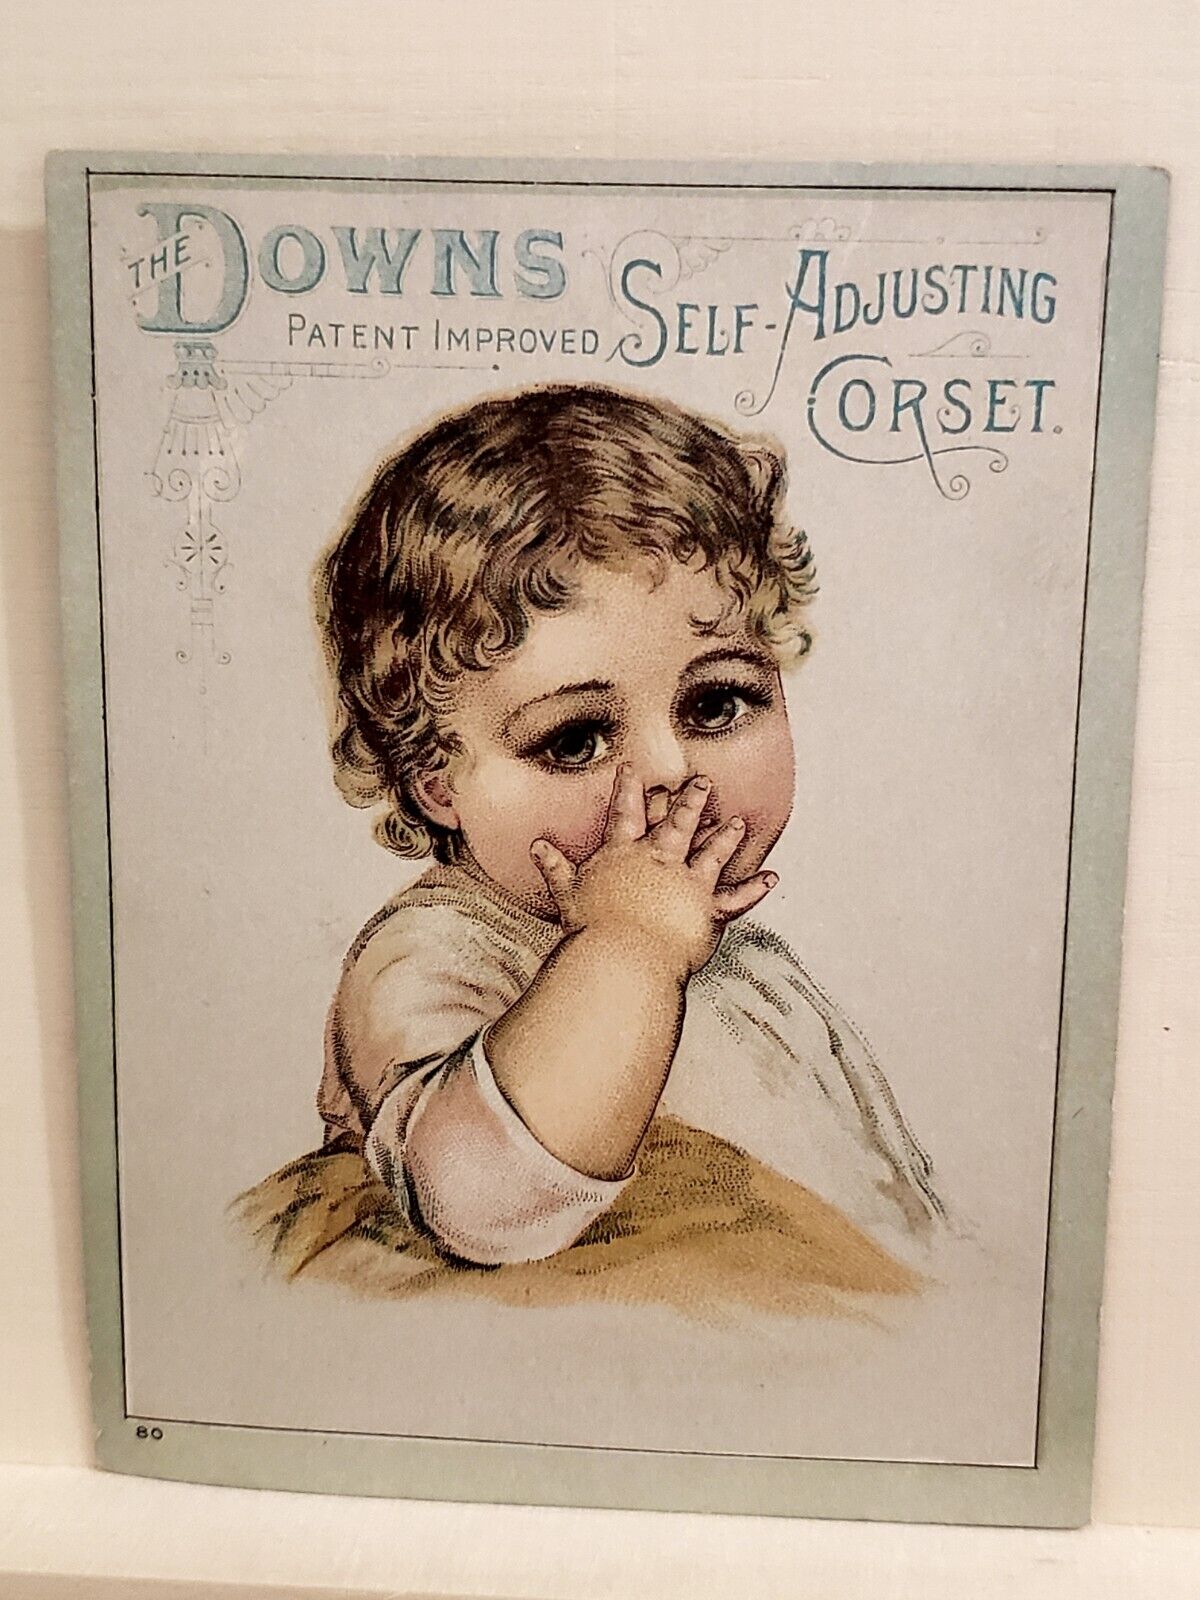 The Downs Self Adjusting Corset Infant Girl Victorian Trade Card Advertisement